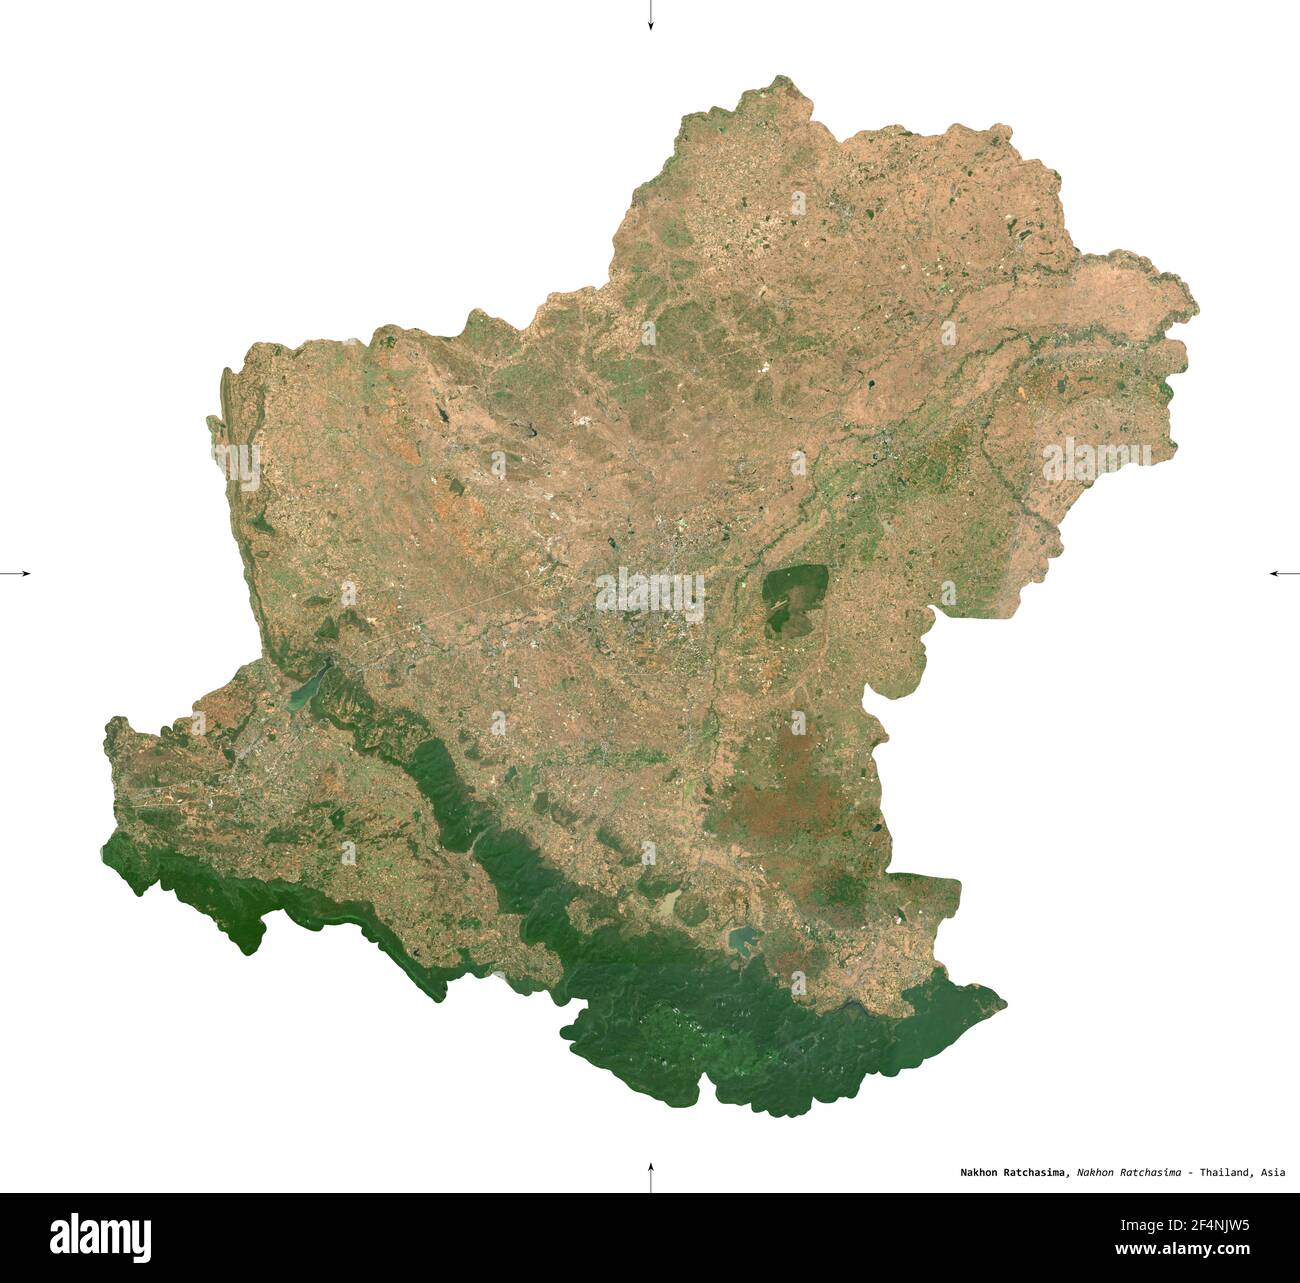 Nakhon Ratchasima, province of Thailand. Sentinel-2 satellite imagery. Shape isolated on white. Description, location of the capital. Contains modifie Stock Photo